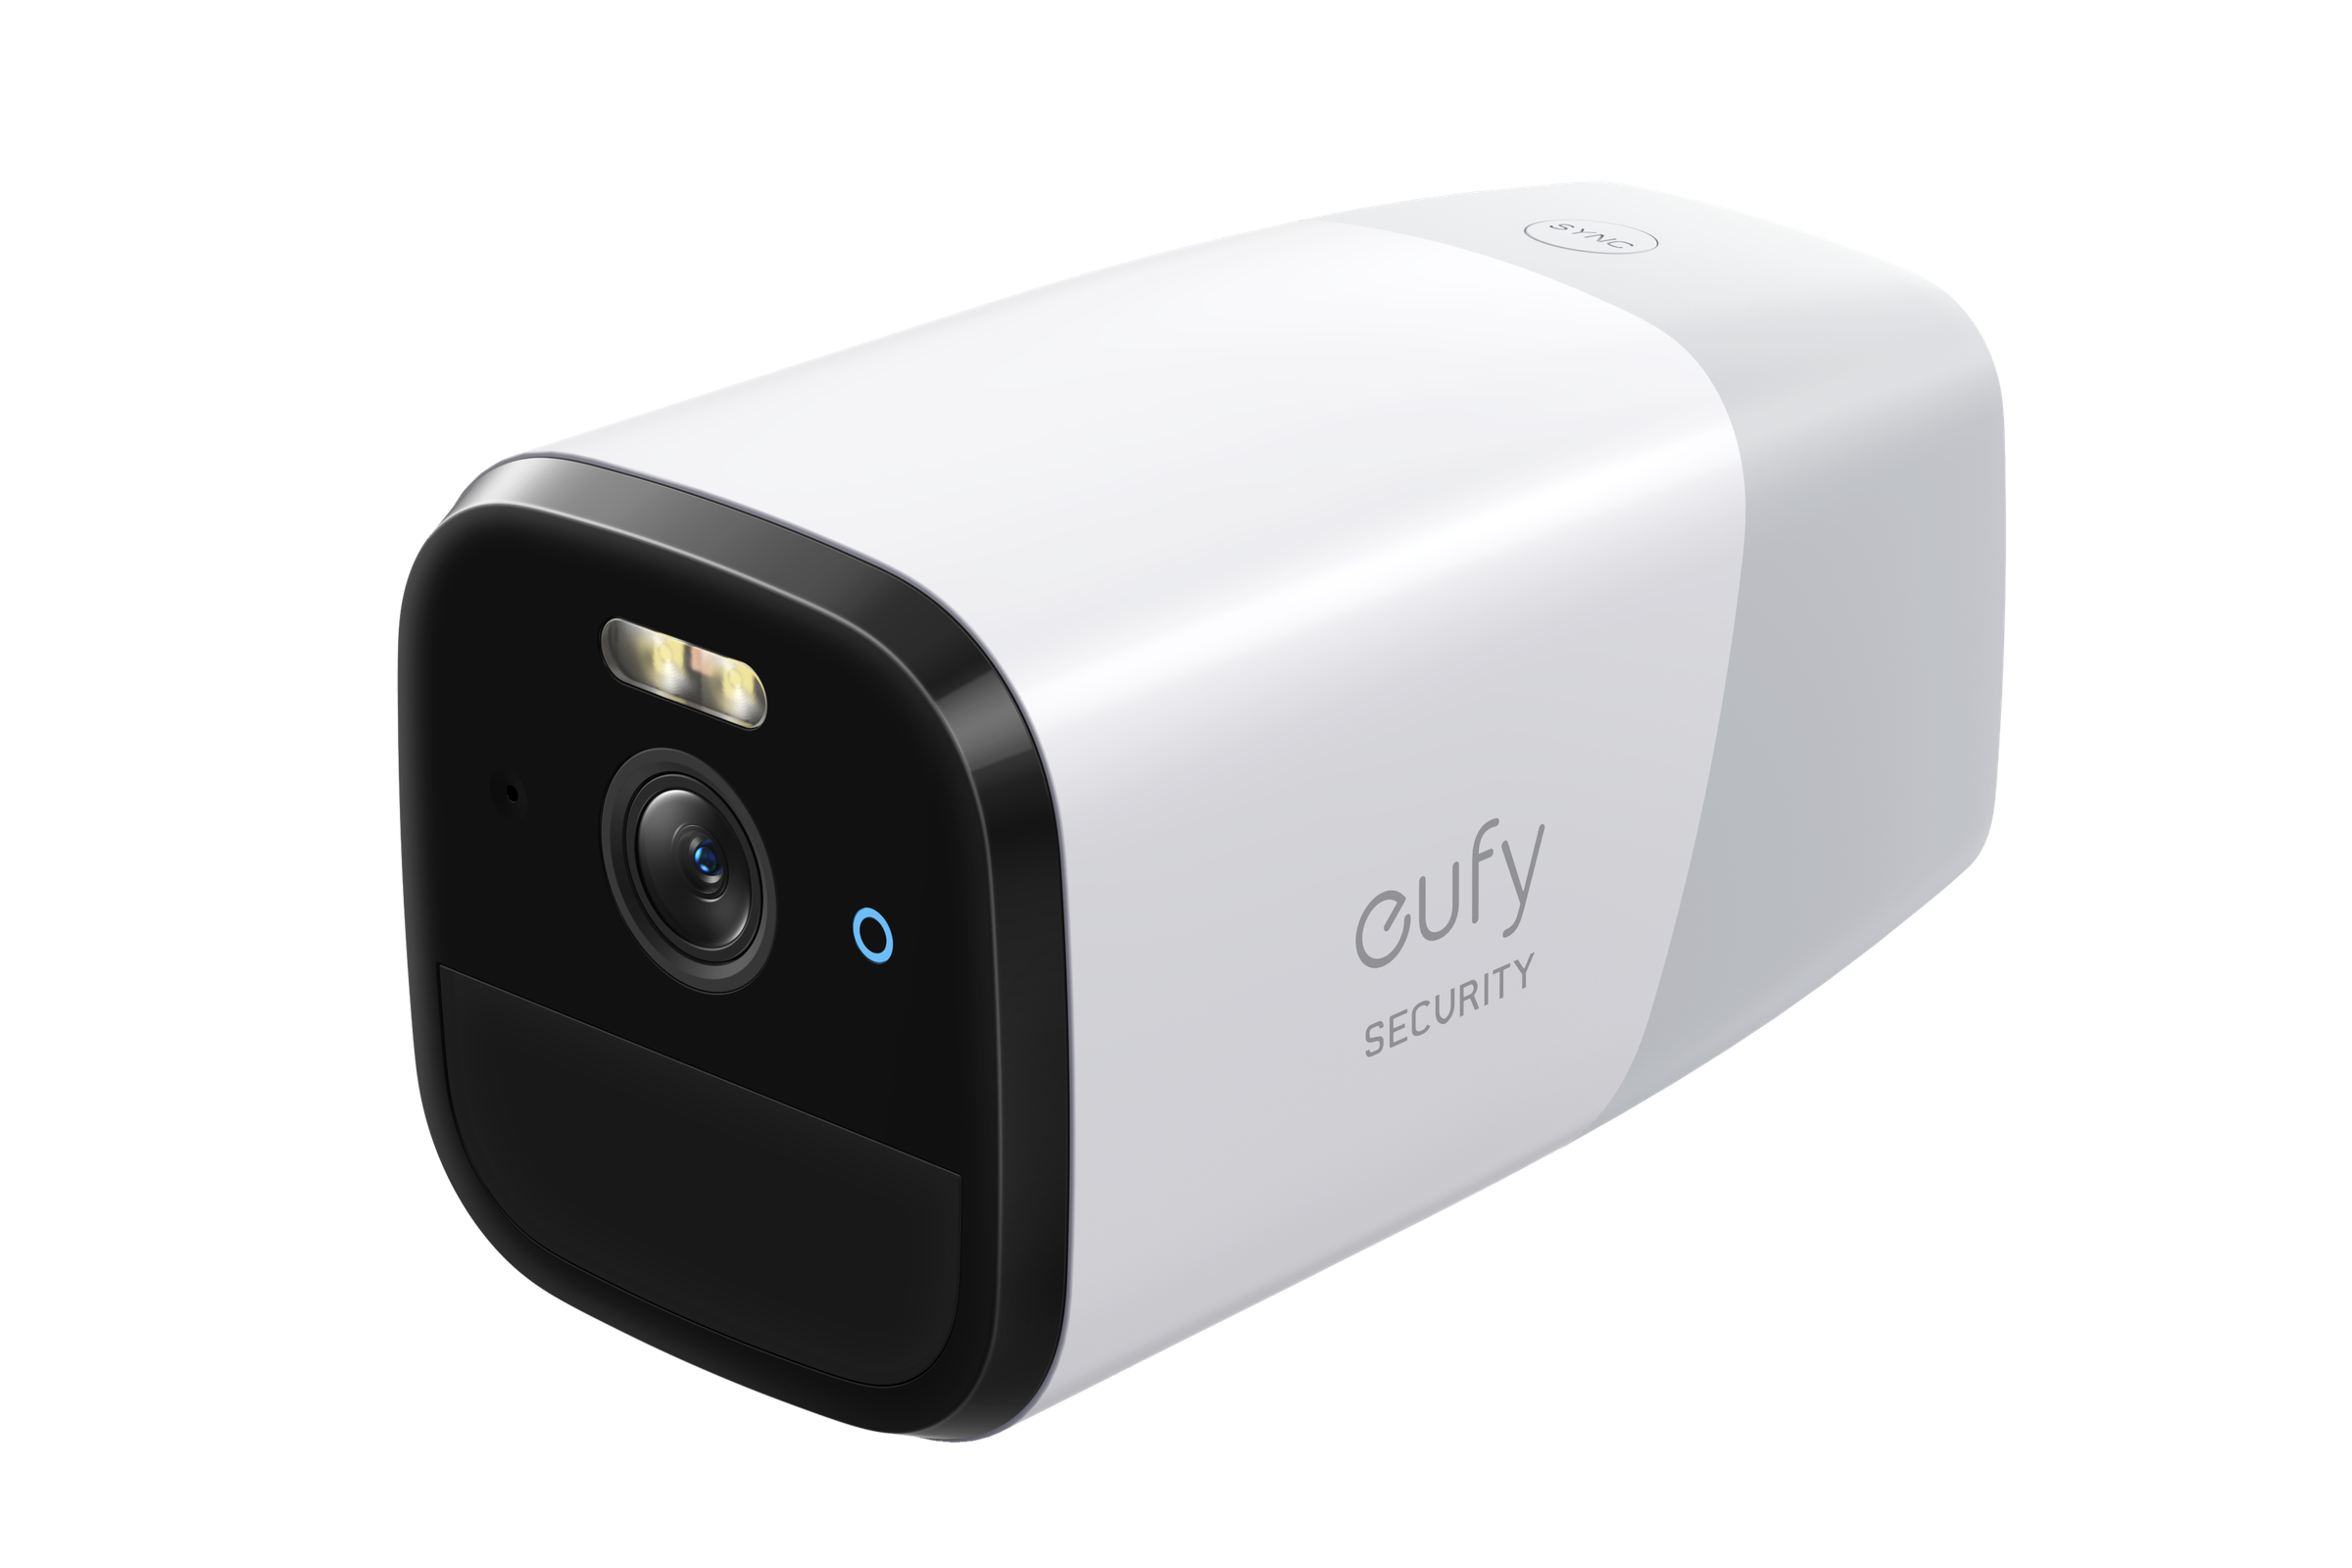 Eufy Security’s 4G Starlight Camera works over LTE.